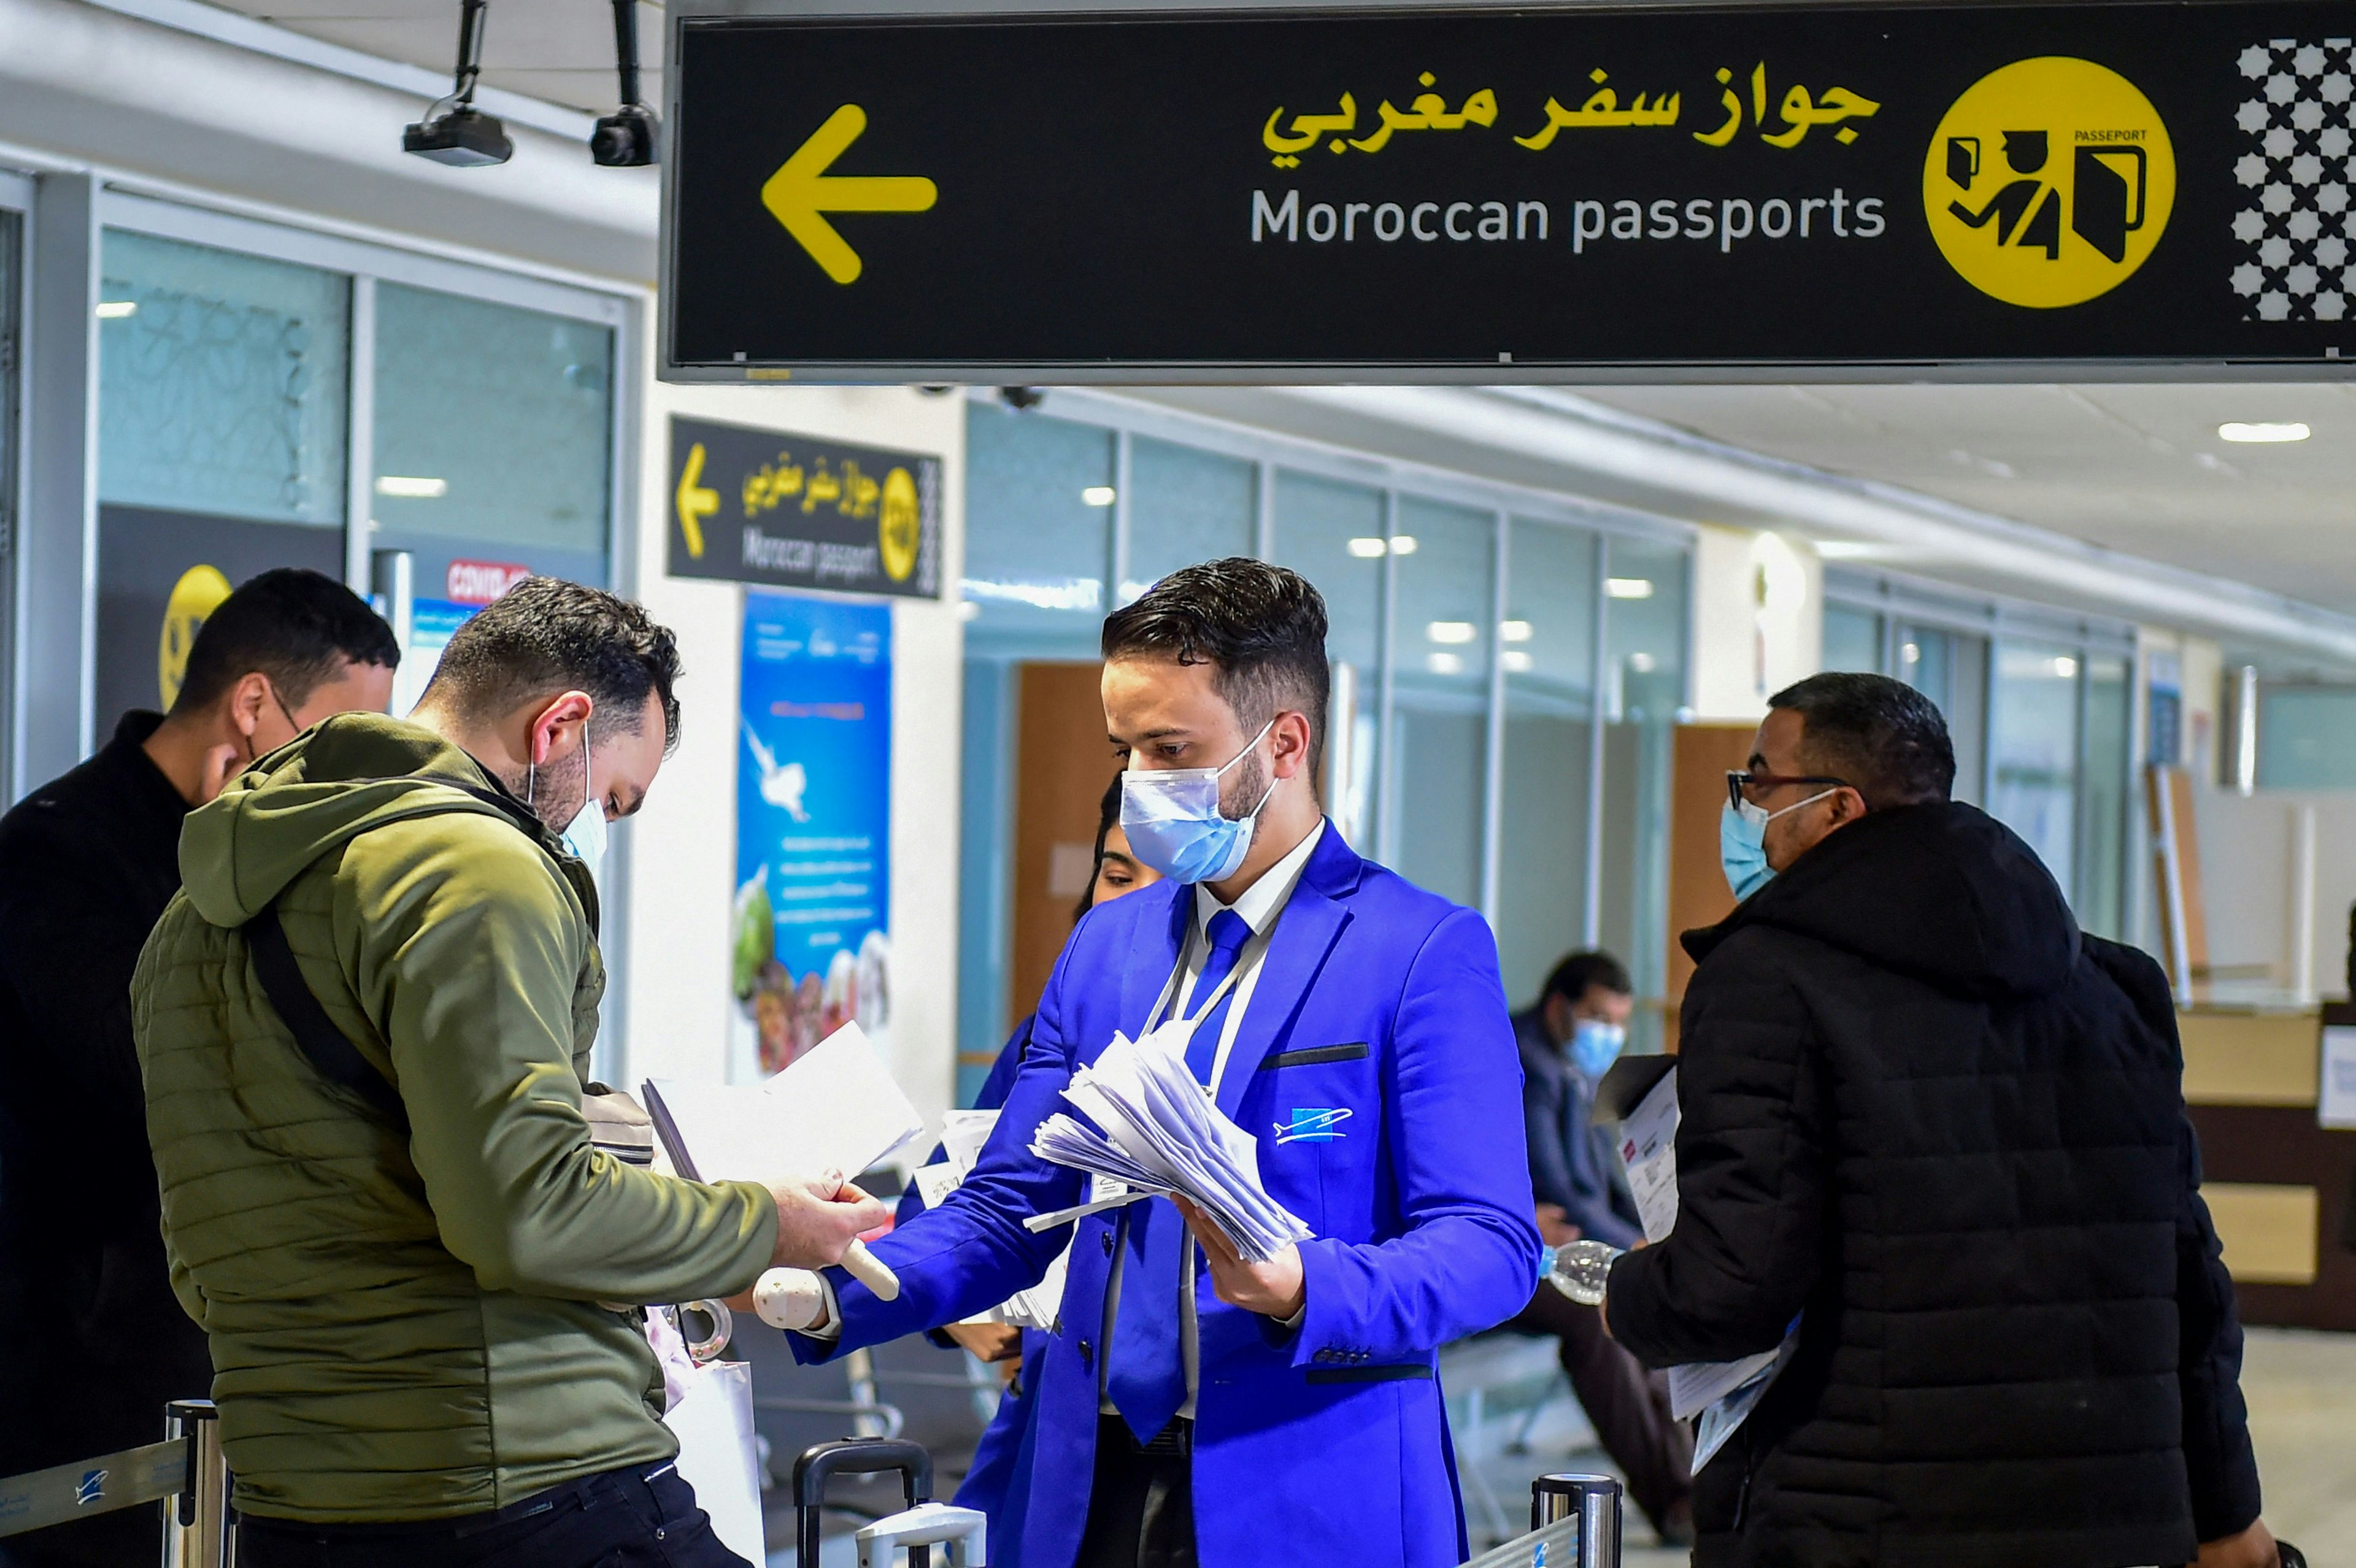 Morocco reopened to international visitors on February 7.